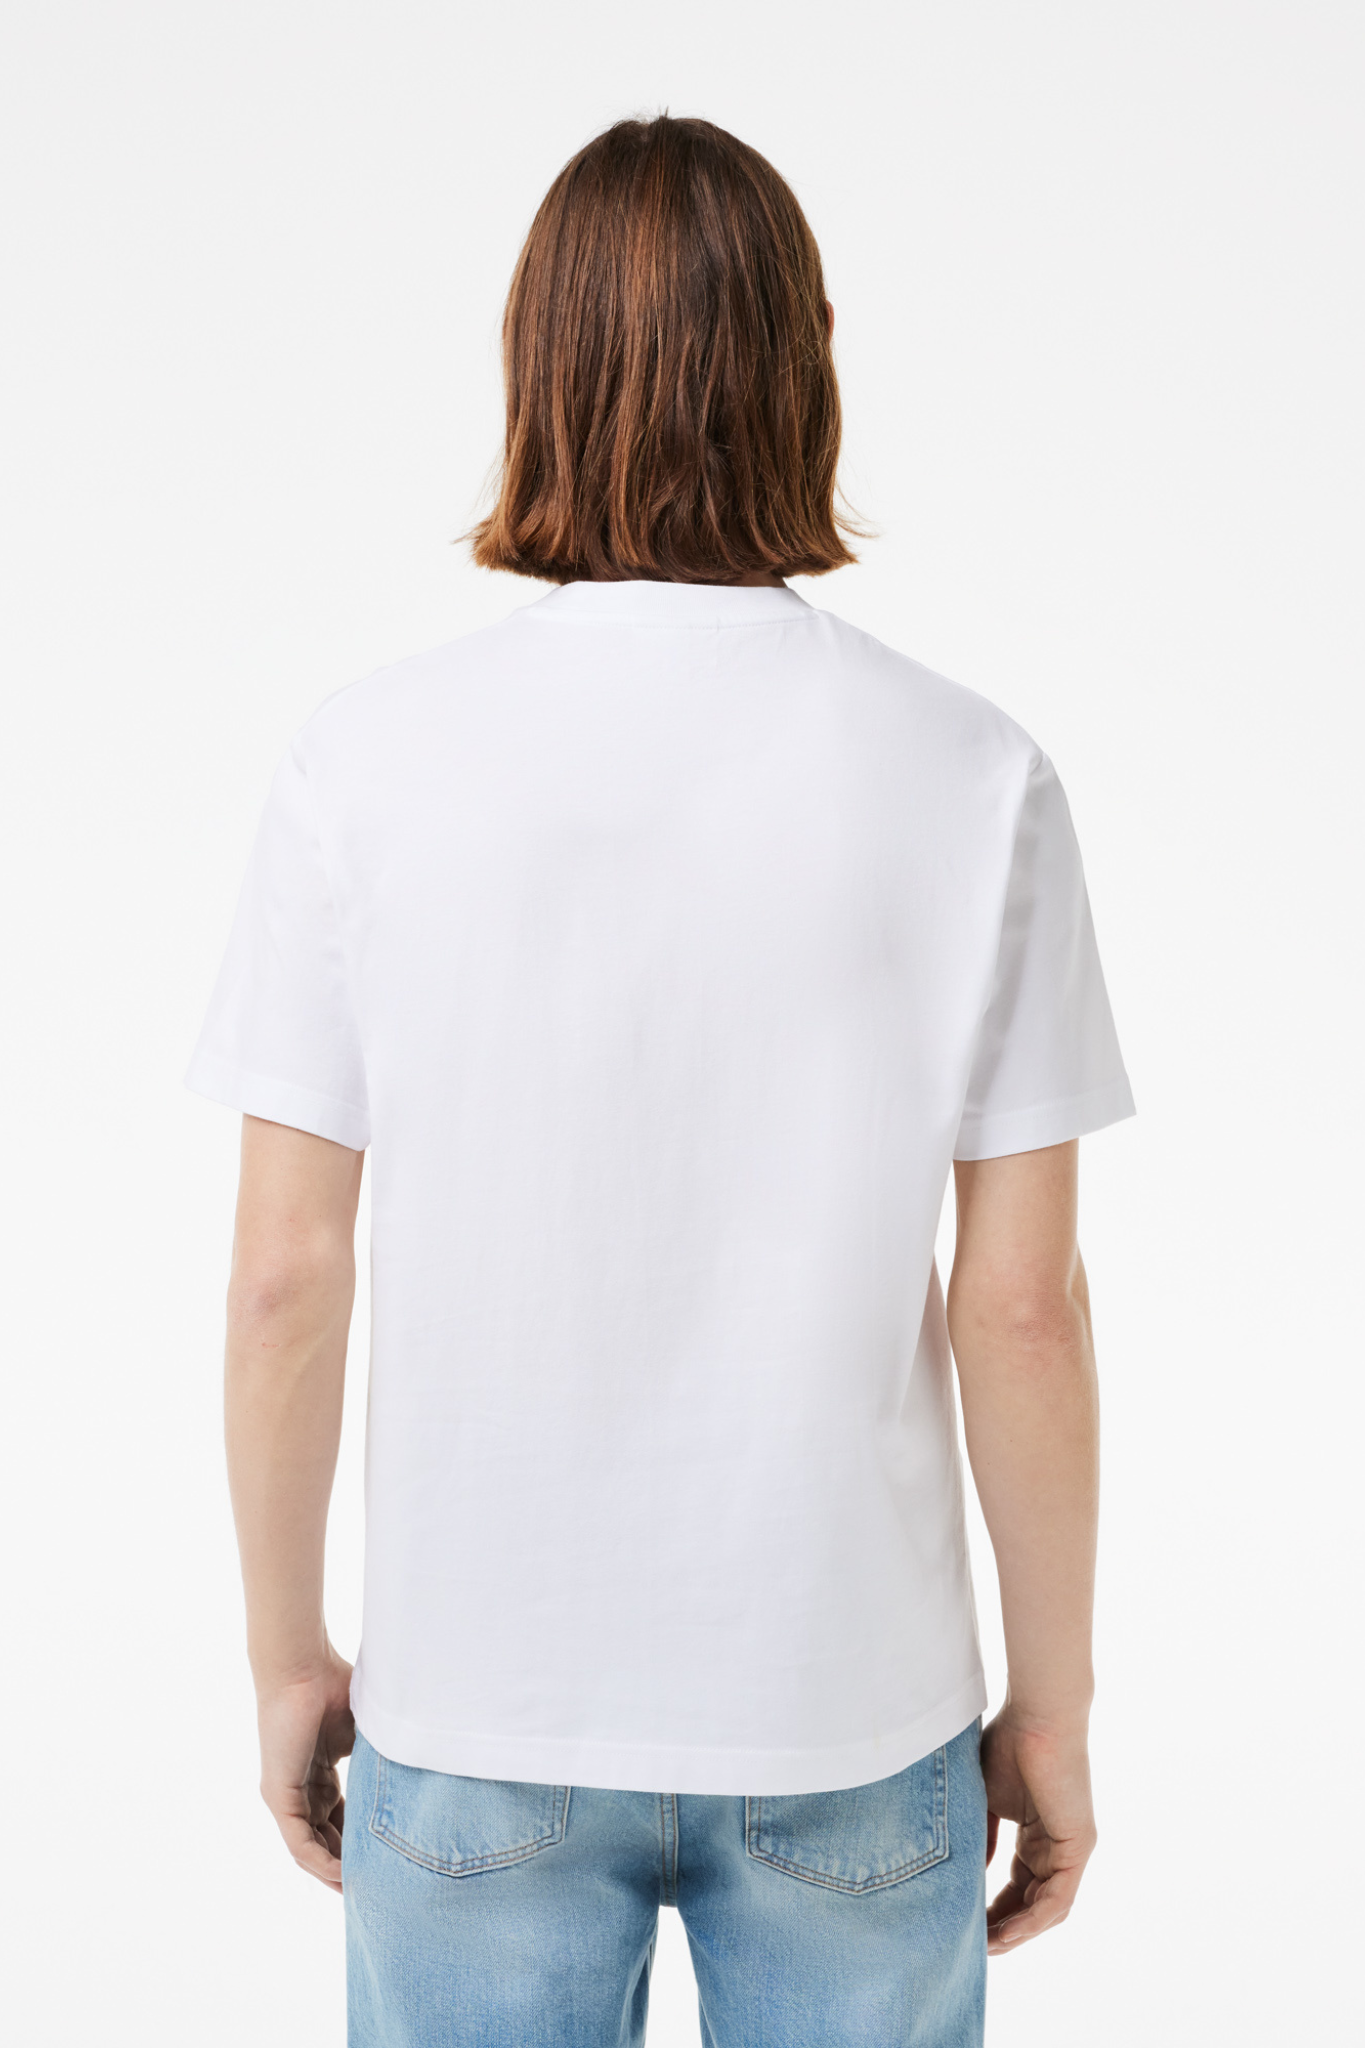 CLASSIC FIT COTTON JERSEY T-SHIRT - WHITE